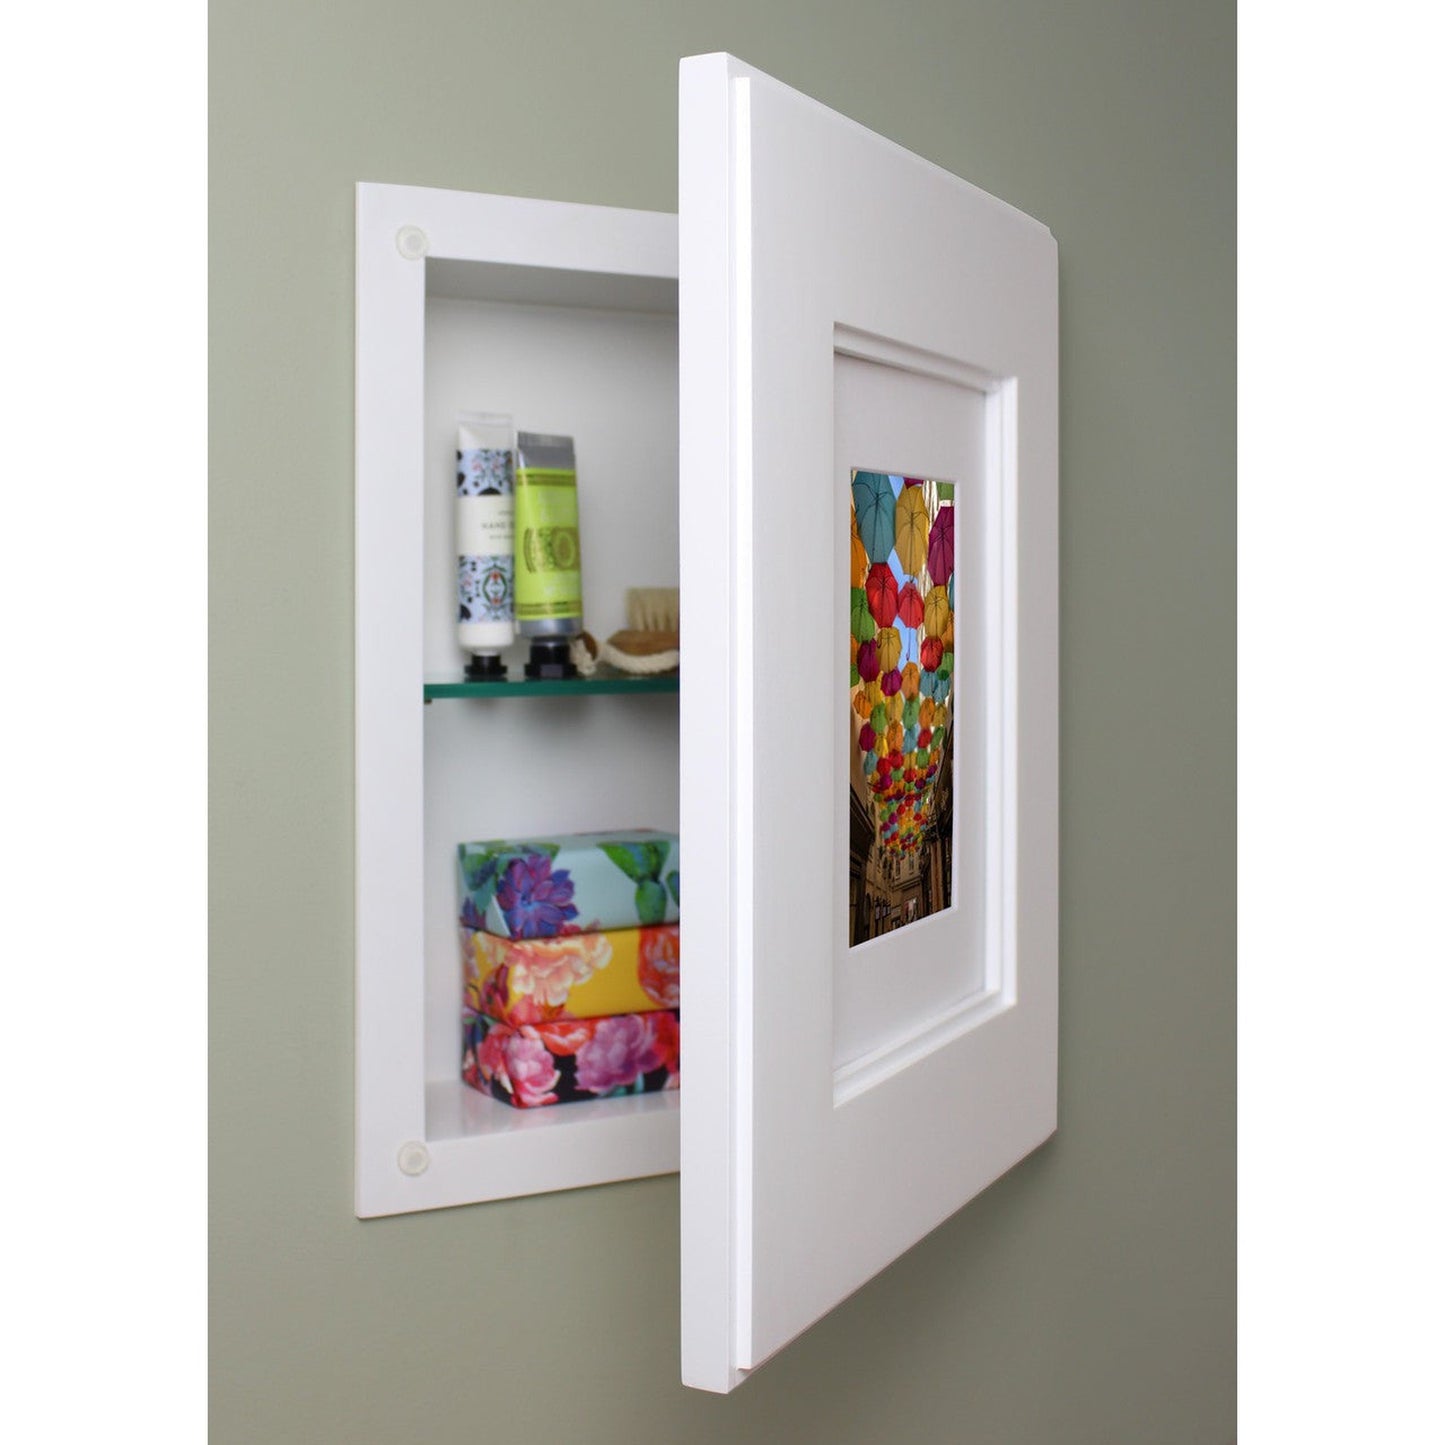 Fox Hollow Furnishings 11" x 14" White Compact Portrait Shaker Special 3" Depth Recessed Picture Frame Medicine Cabinet With Ivory Matting